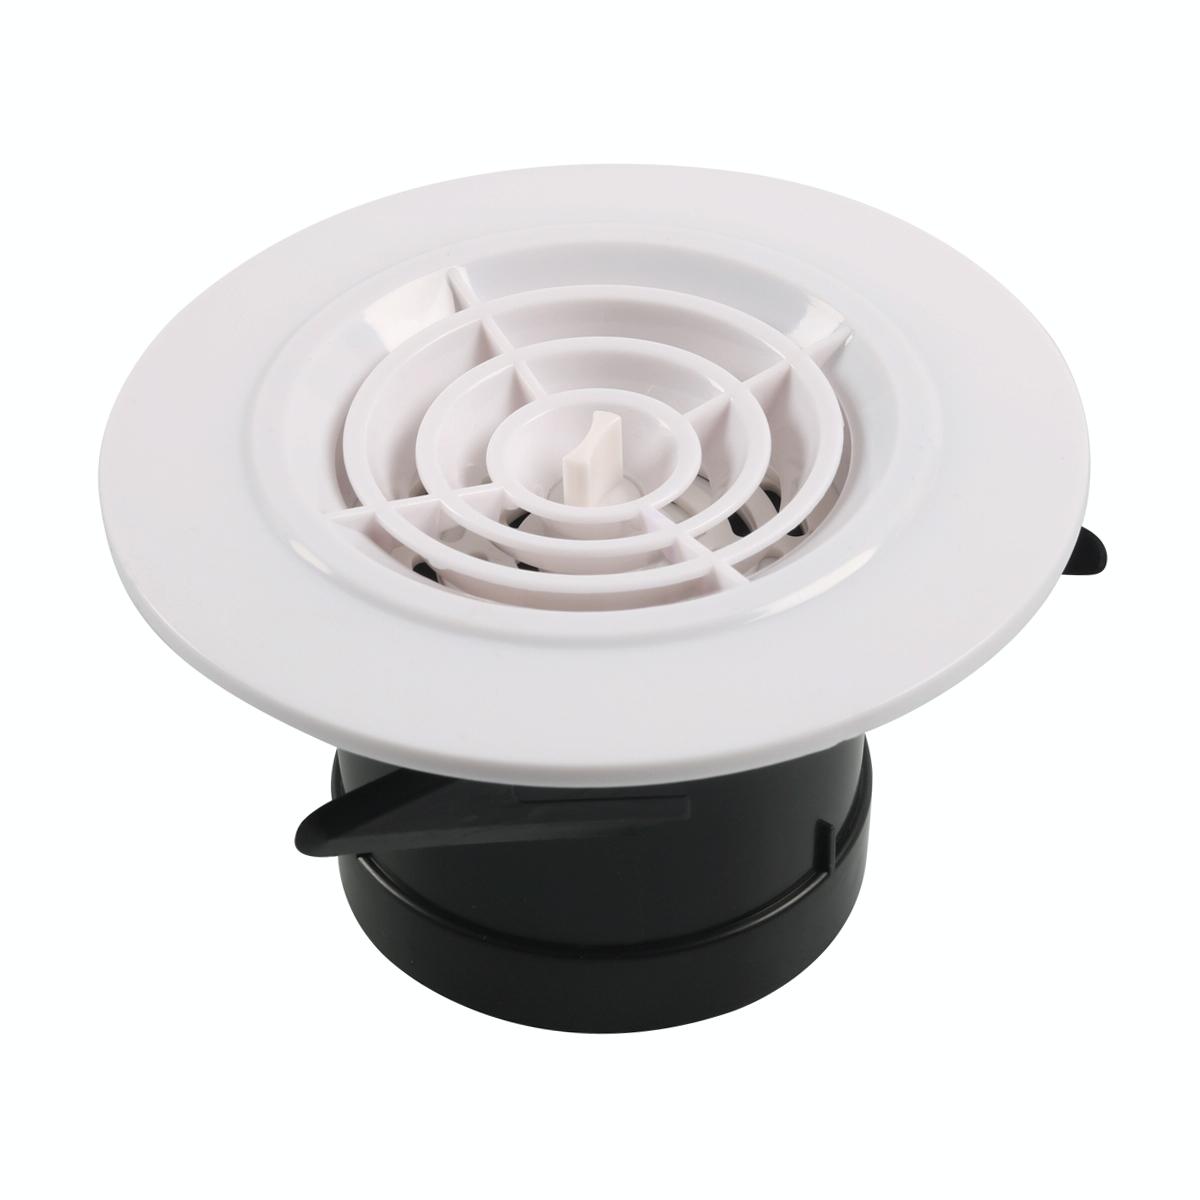 A6769-01 RV / Trailer ABS Round Adjustable Air Outlet Vent